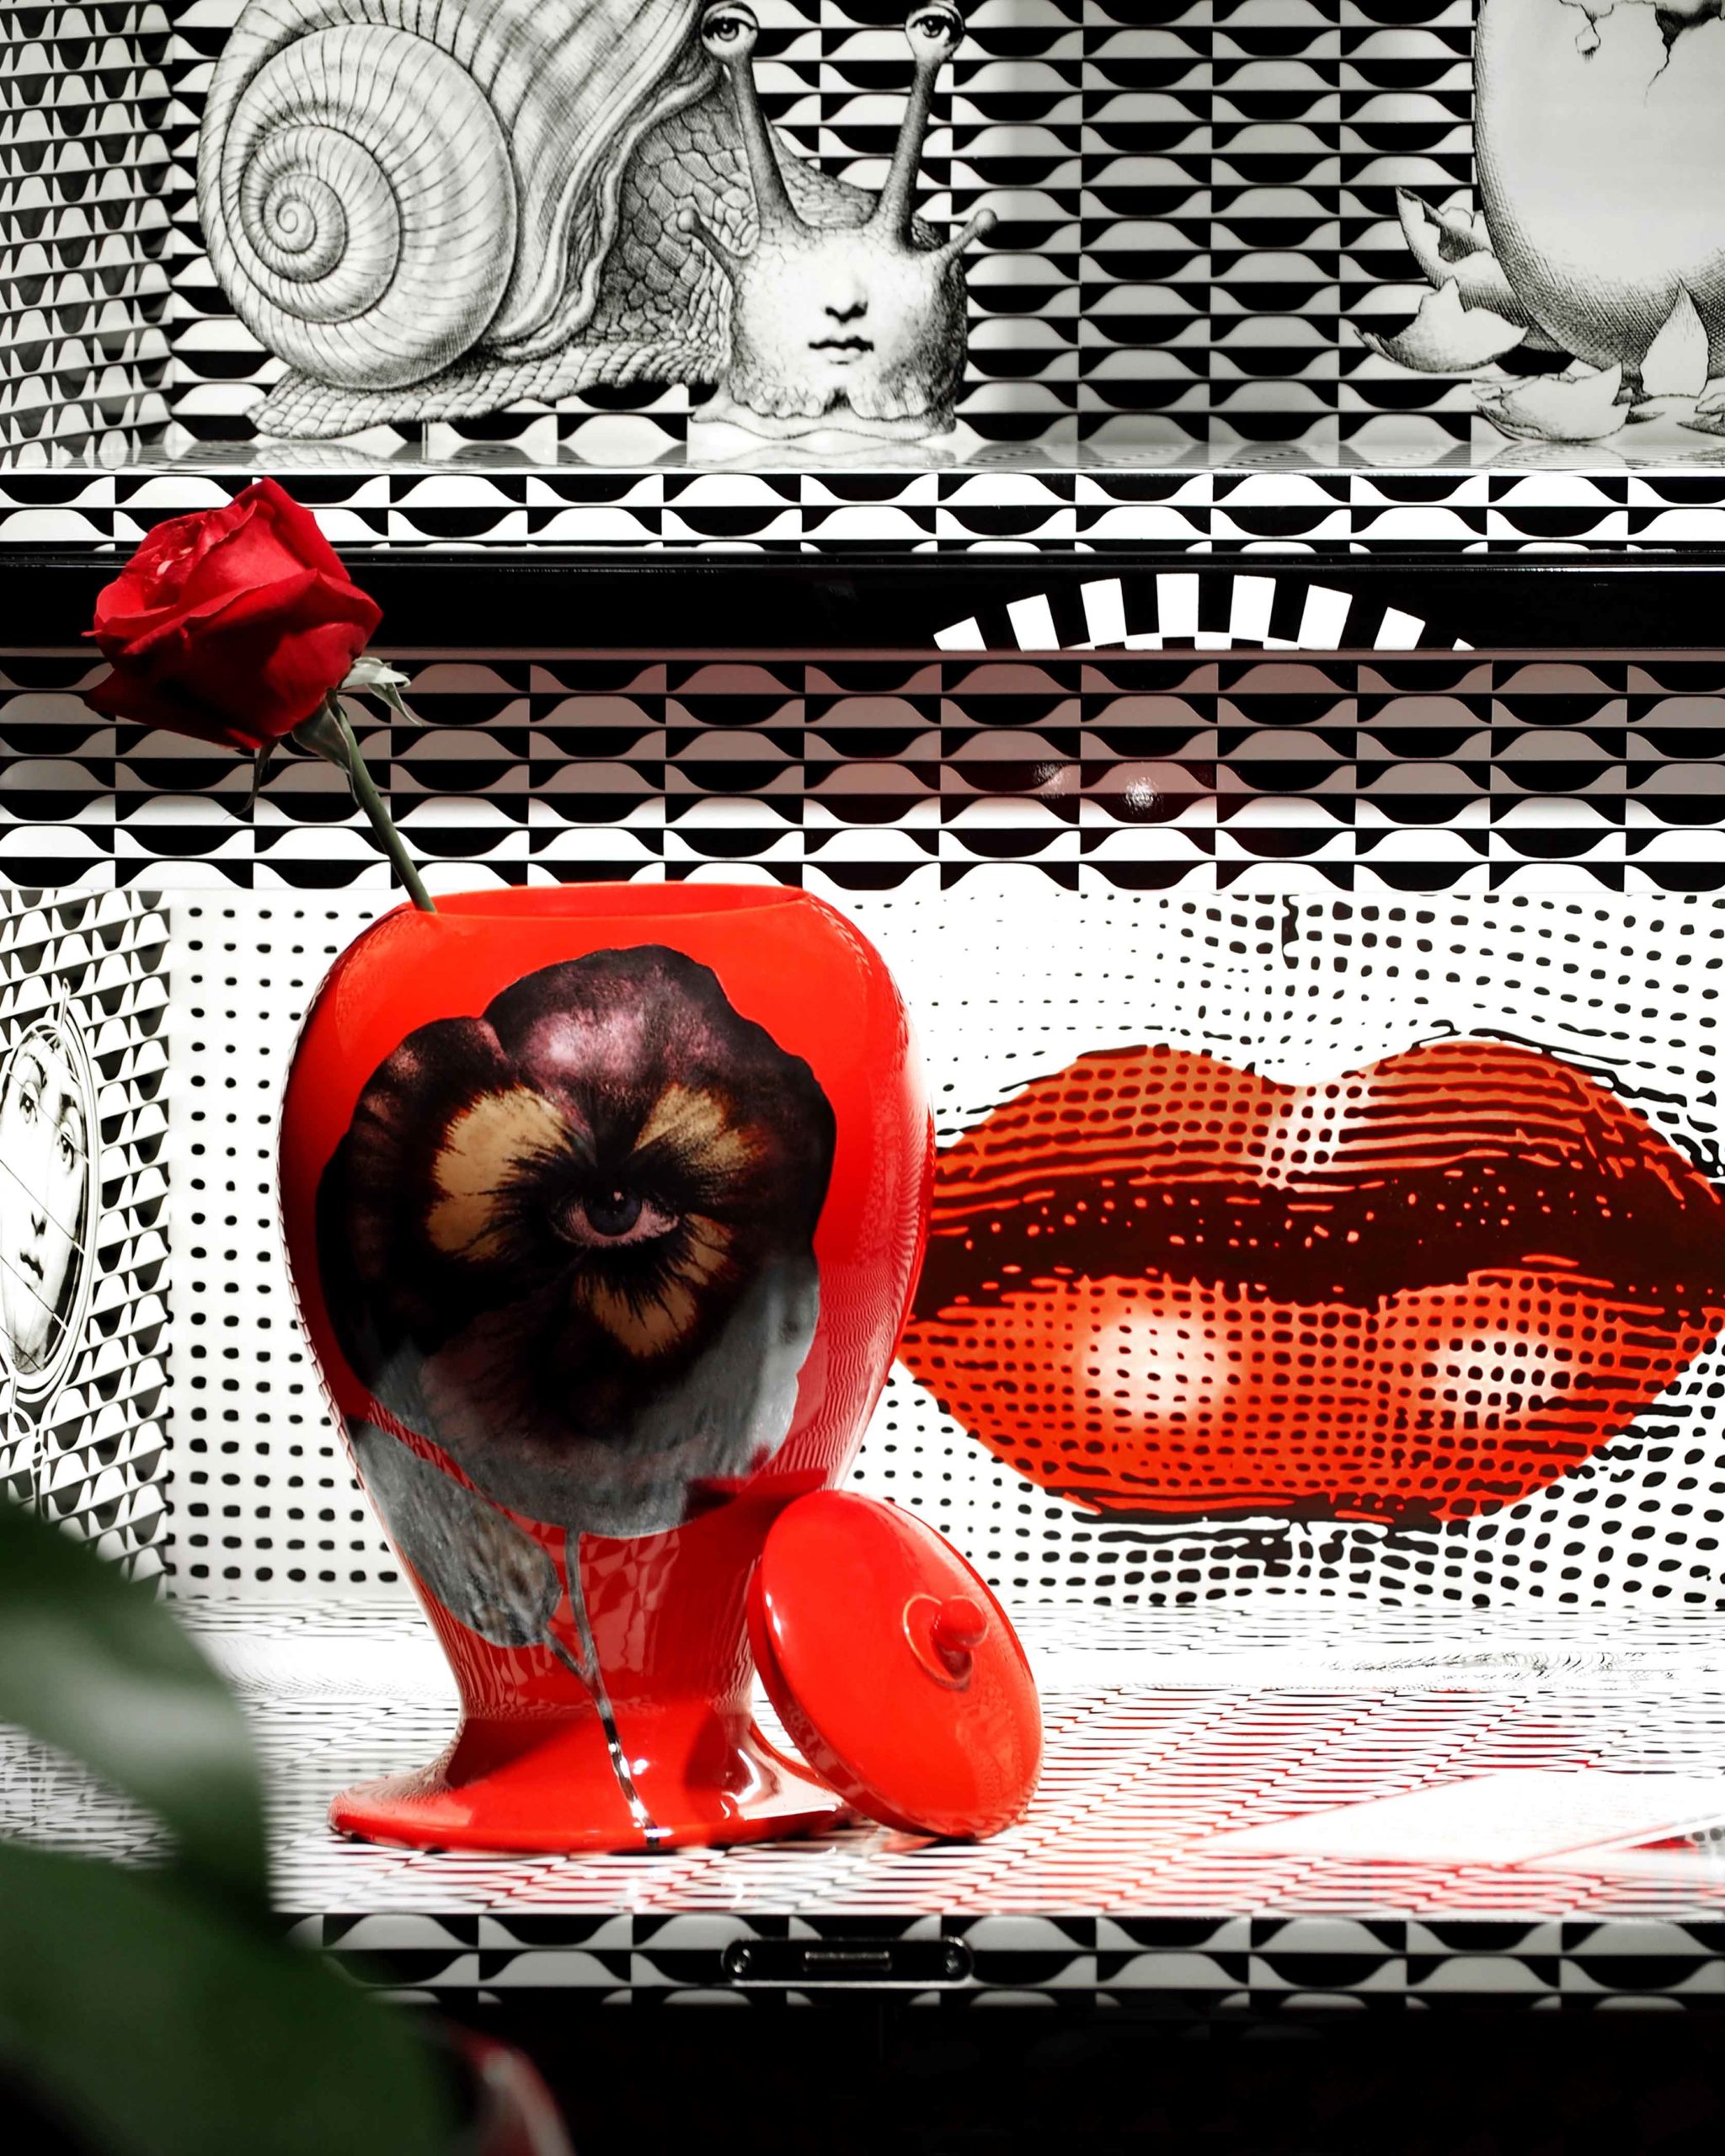 Dive into the mesmerising world of art and design by Piero Fornasetti